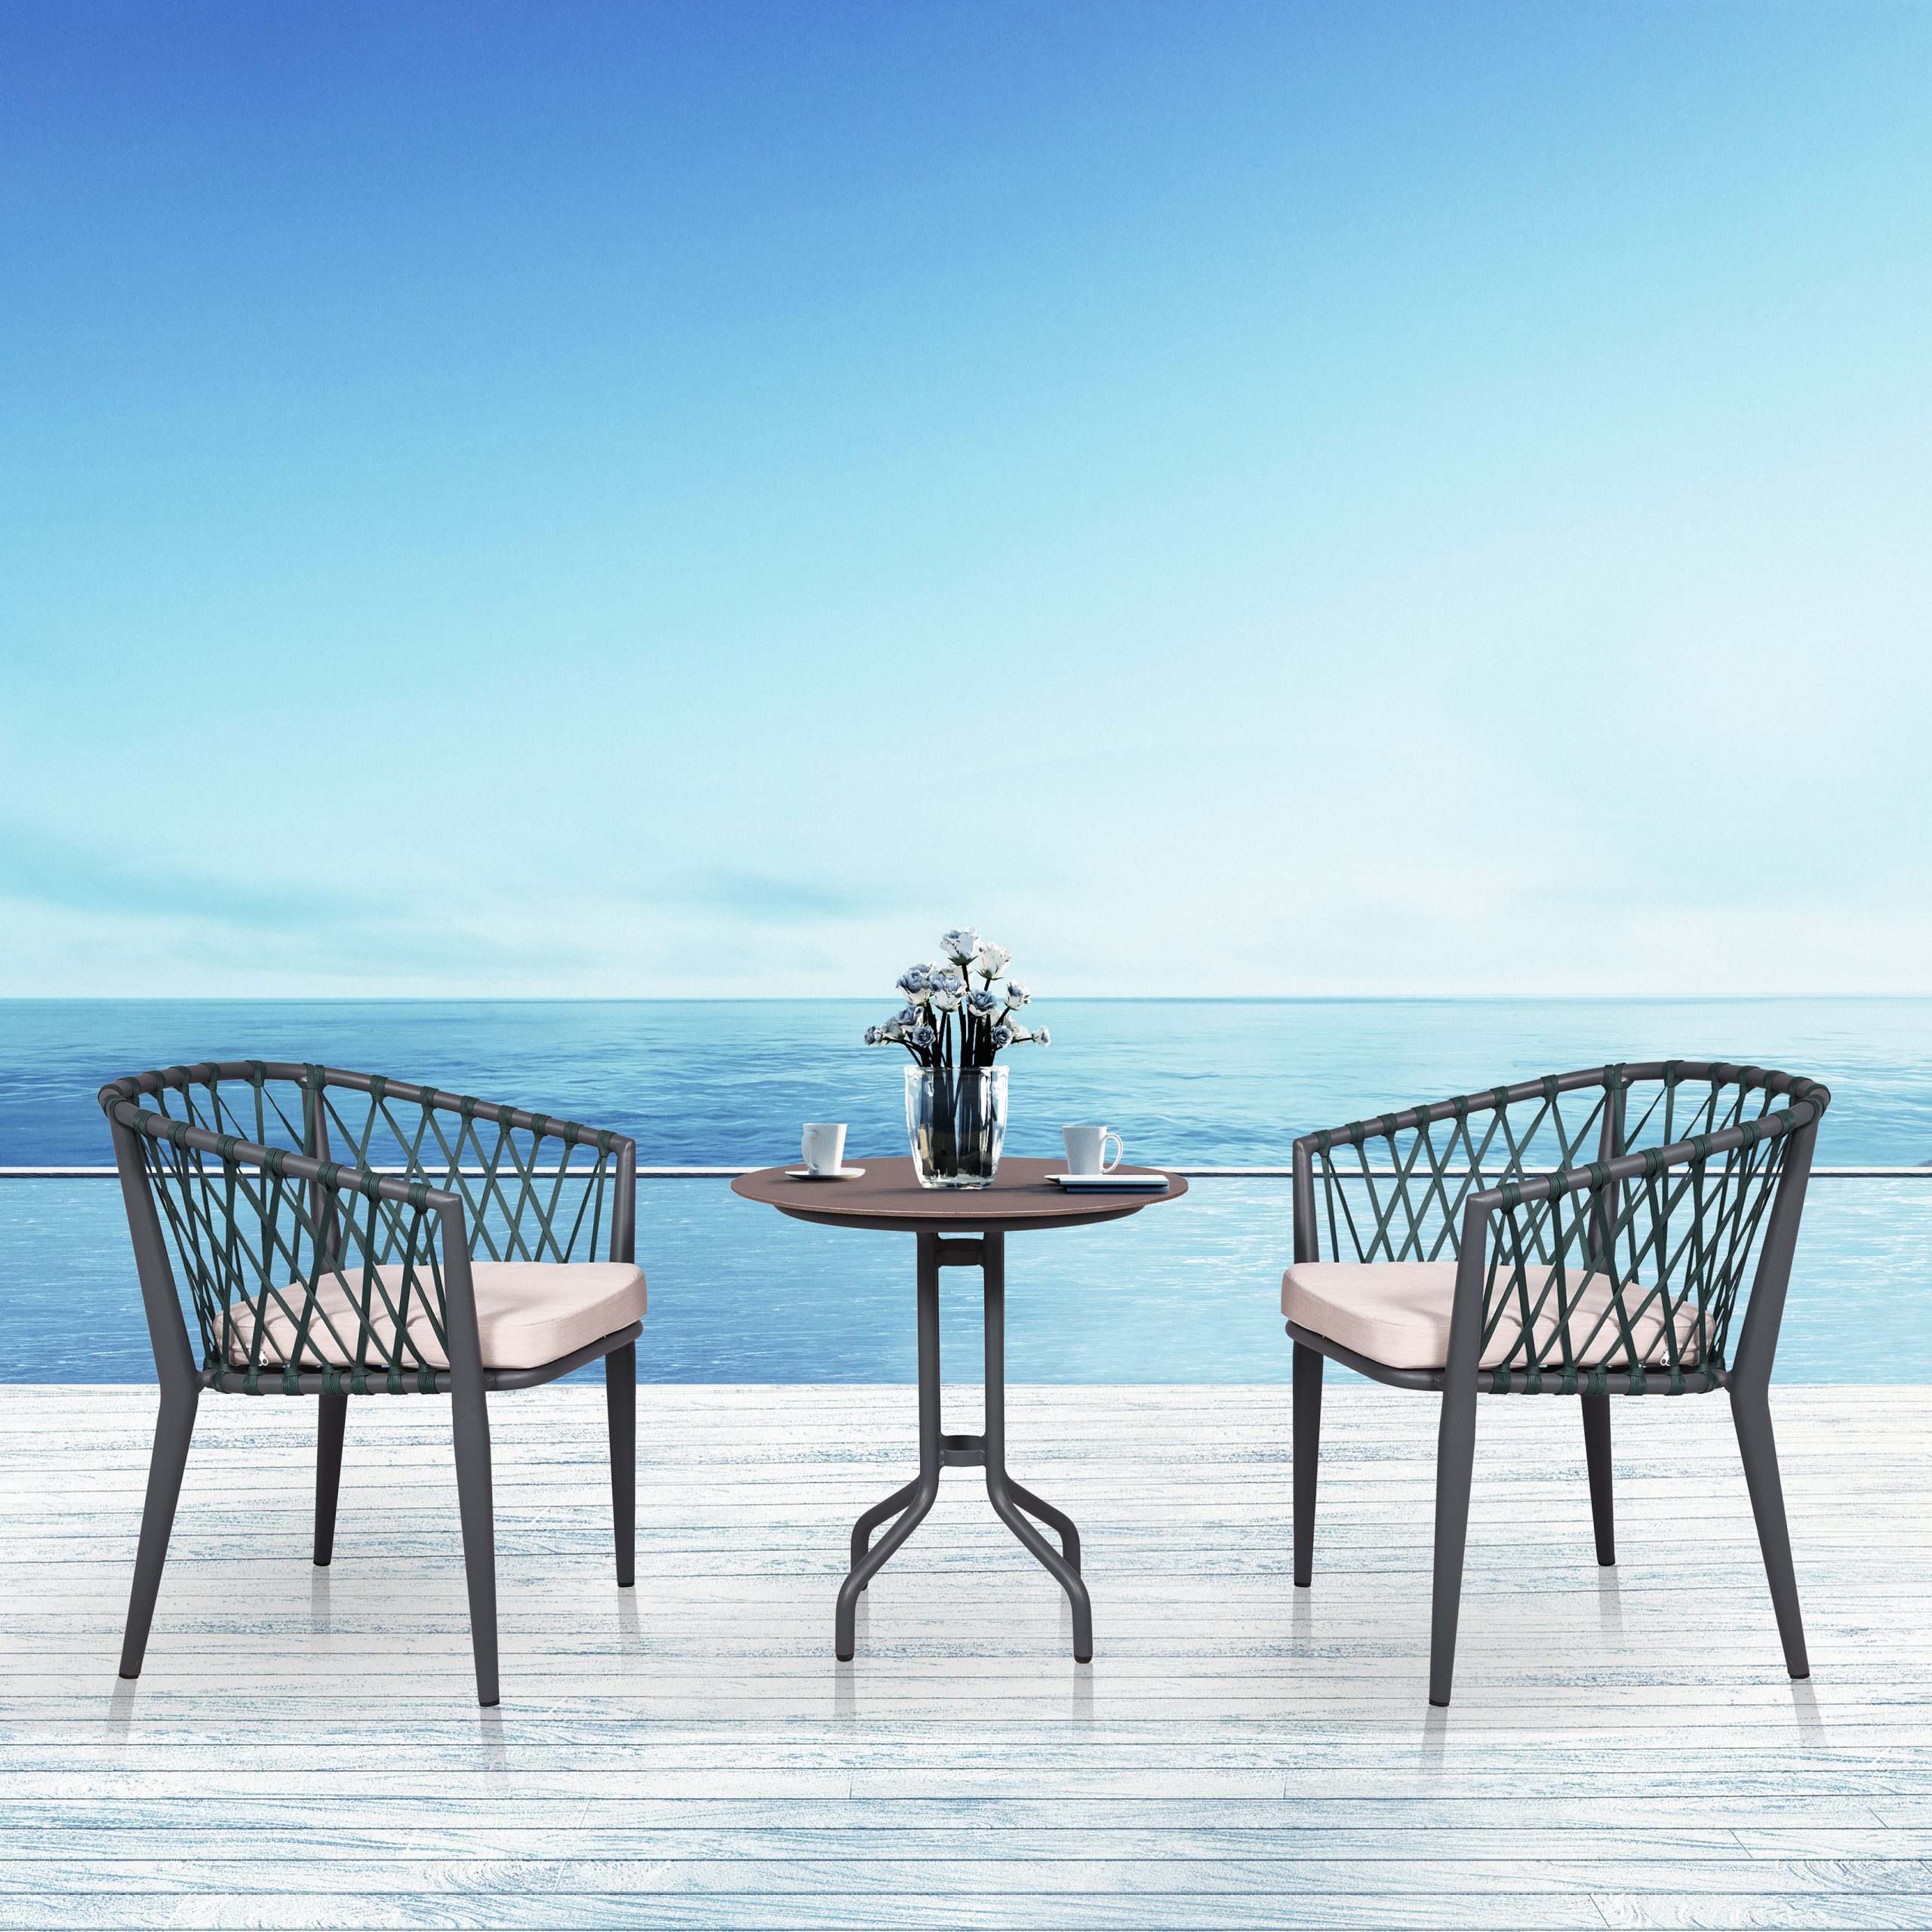 Loom Crafts Outdoor Garden Furniture Two LEO LCCH.010.004 and a table on a deck overlooking the ocean.